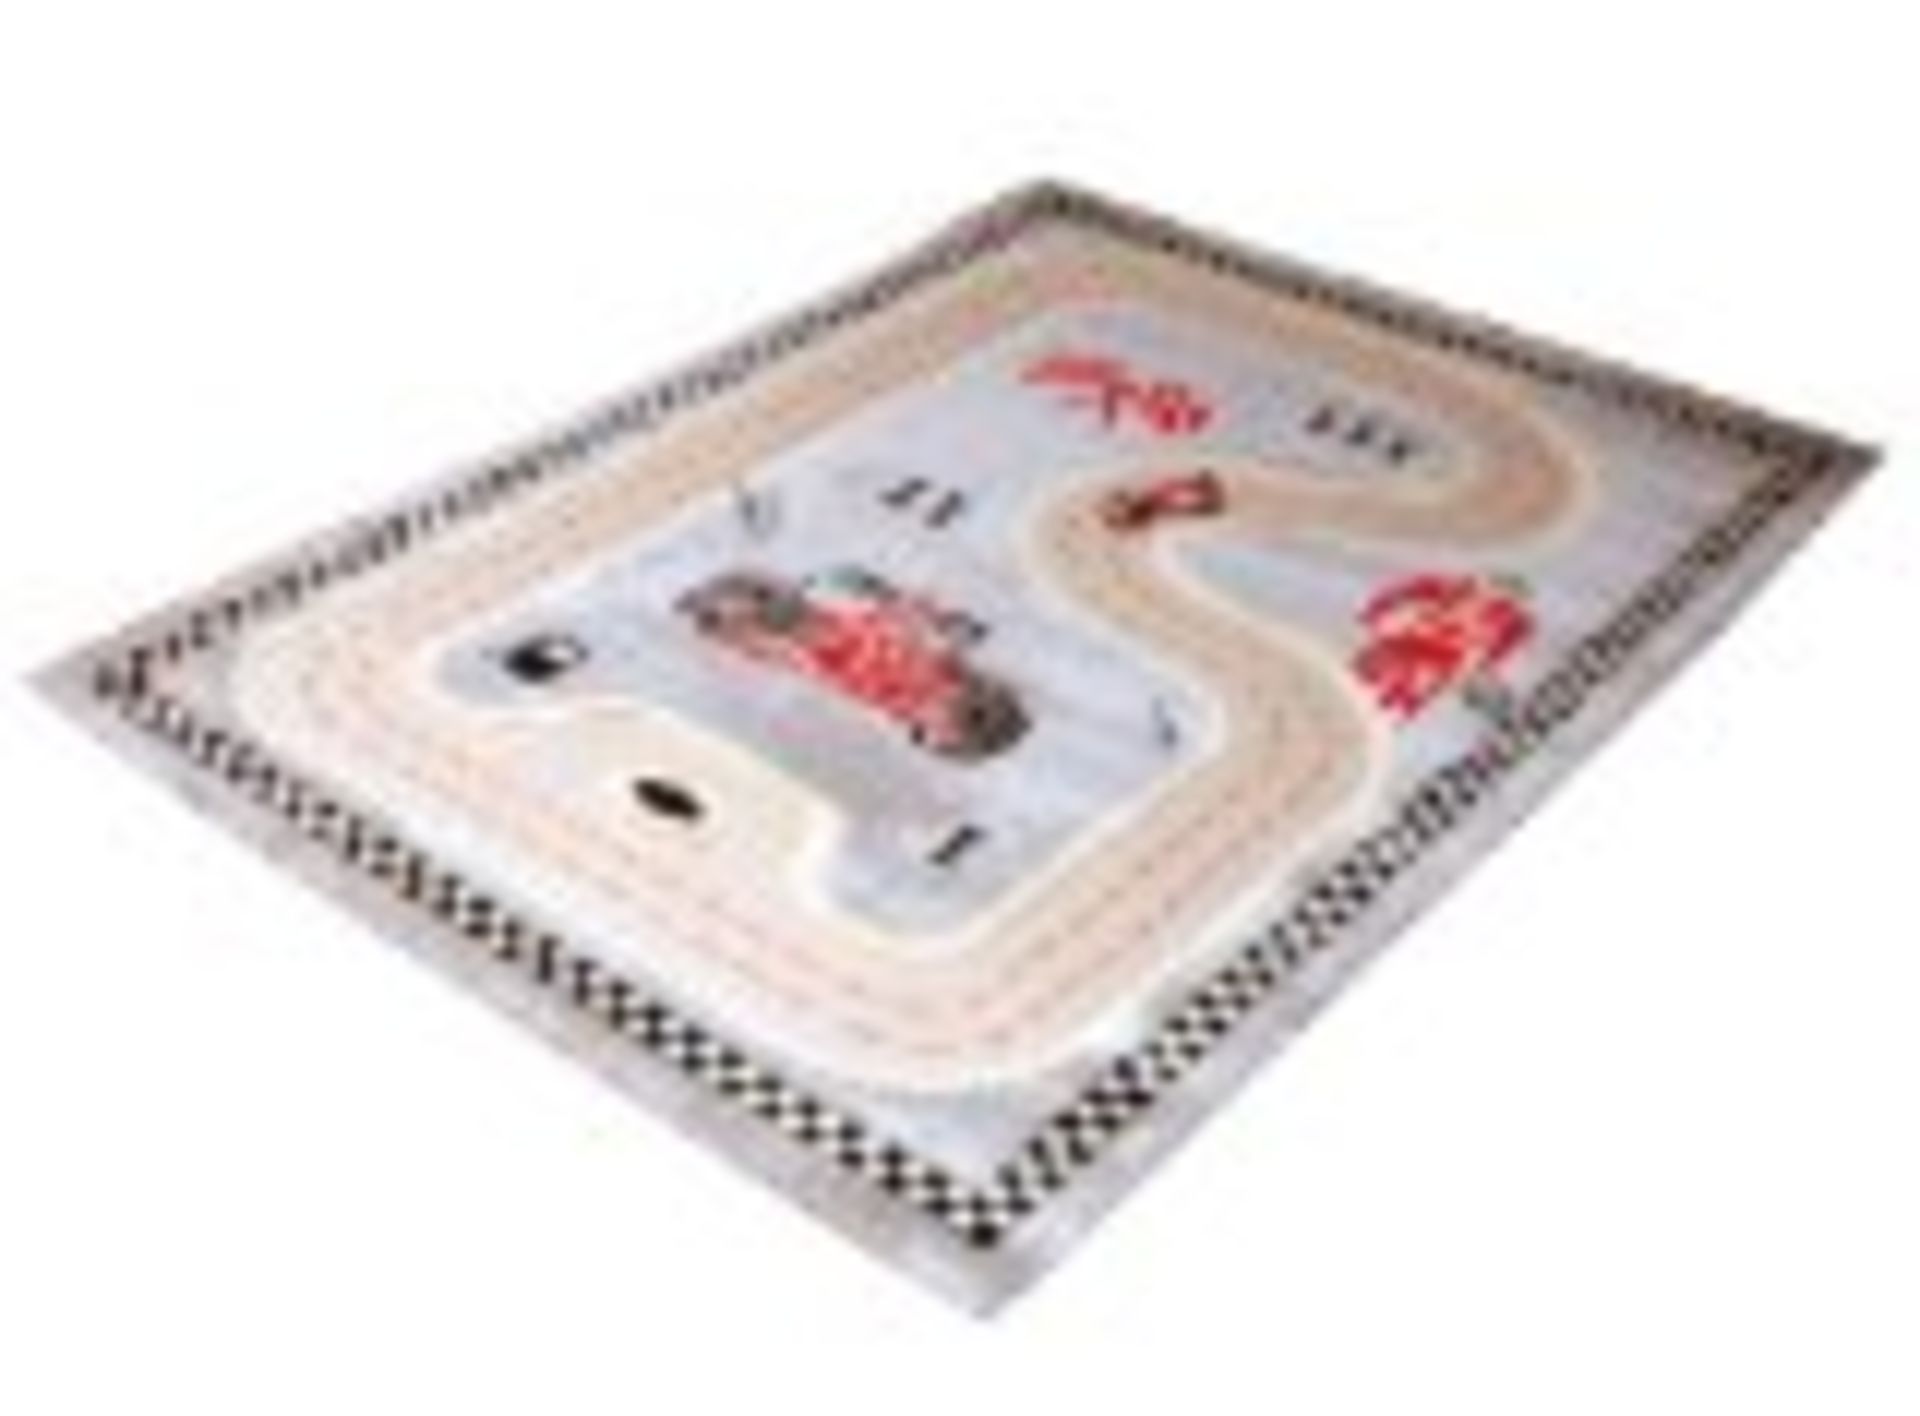 Little Helper IVI Exclusive Large & Thick 3D Childrens Play Mat & Rug in Race Track theme with 3 - Image 2 of 2